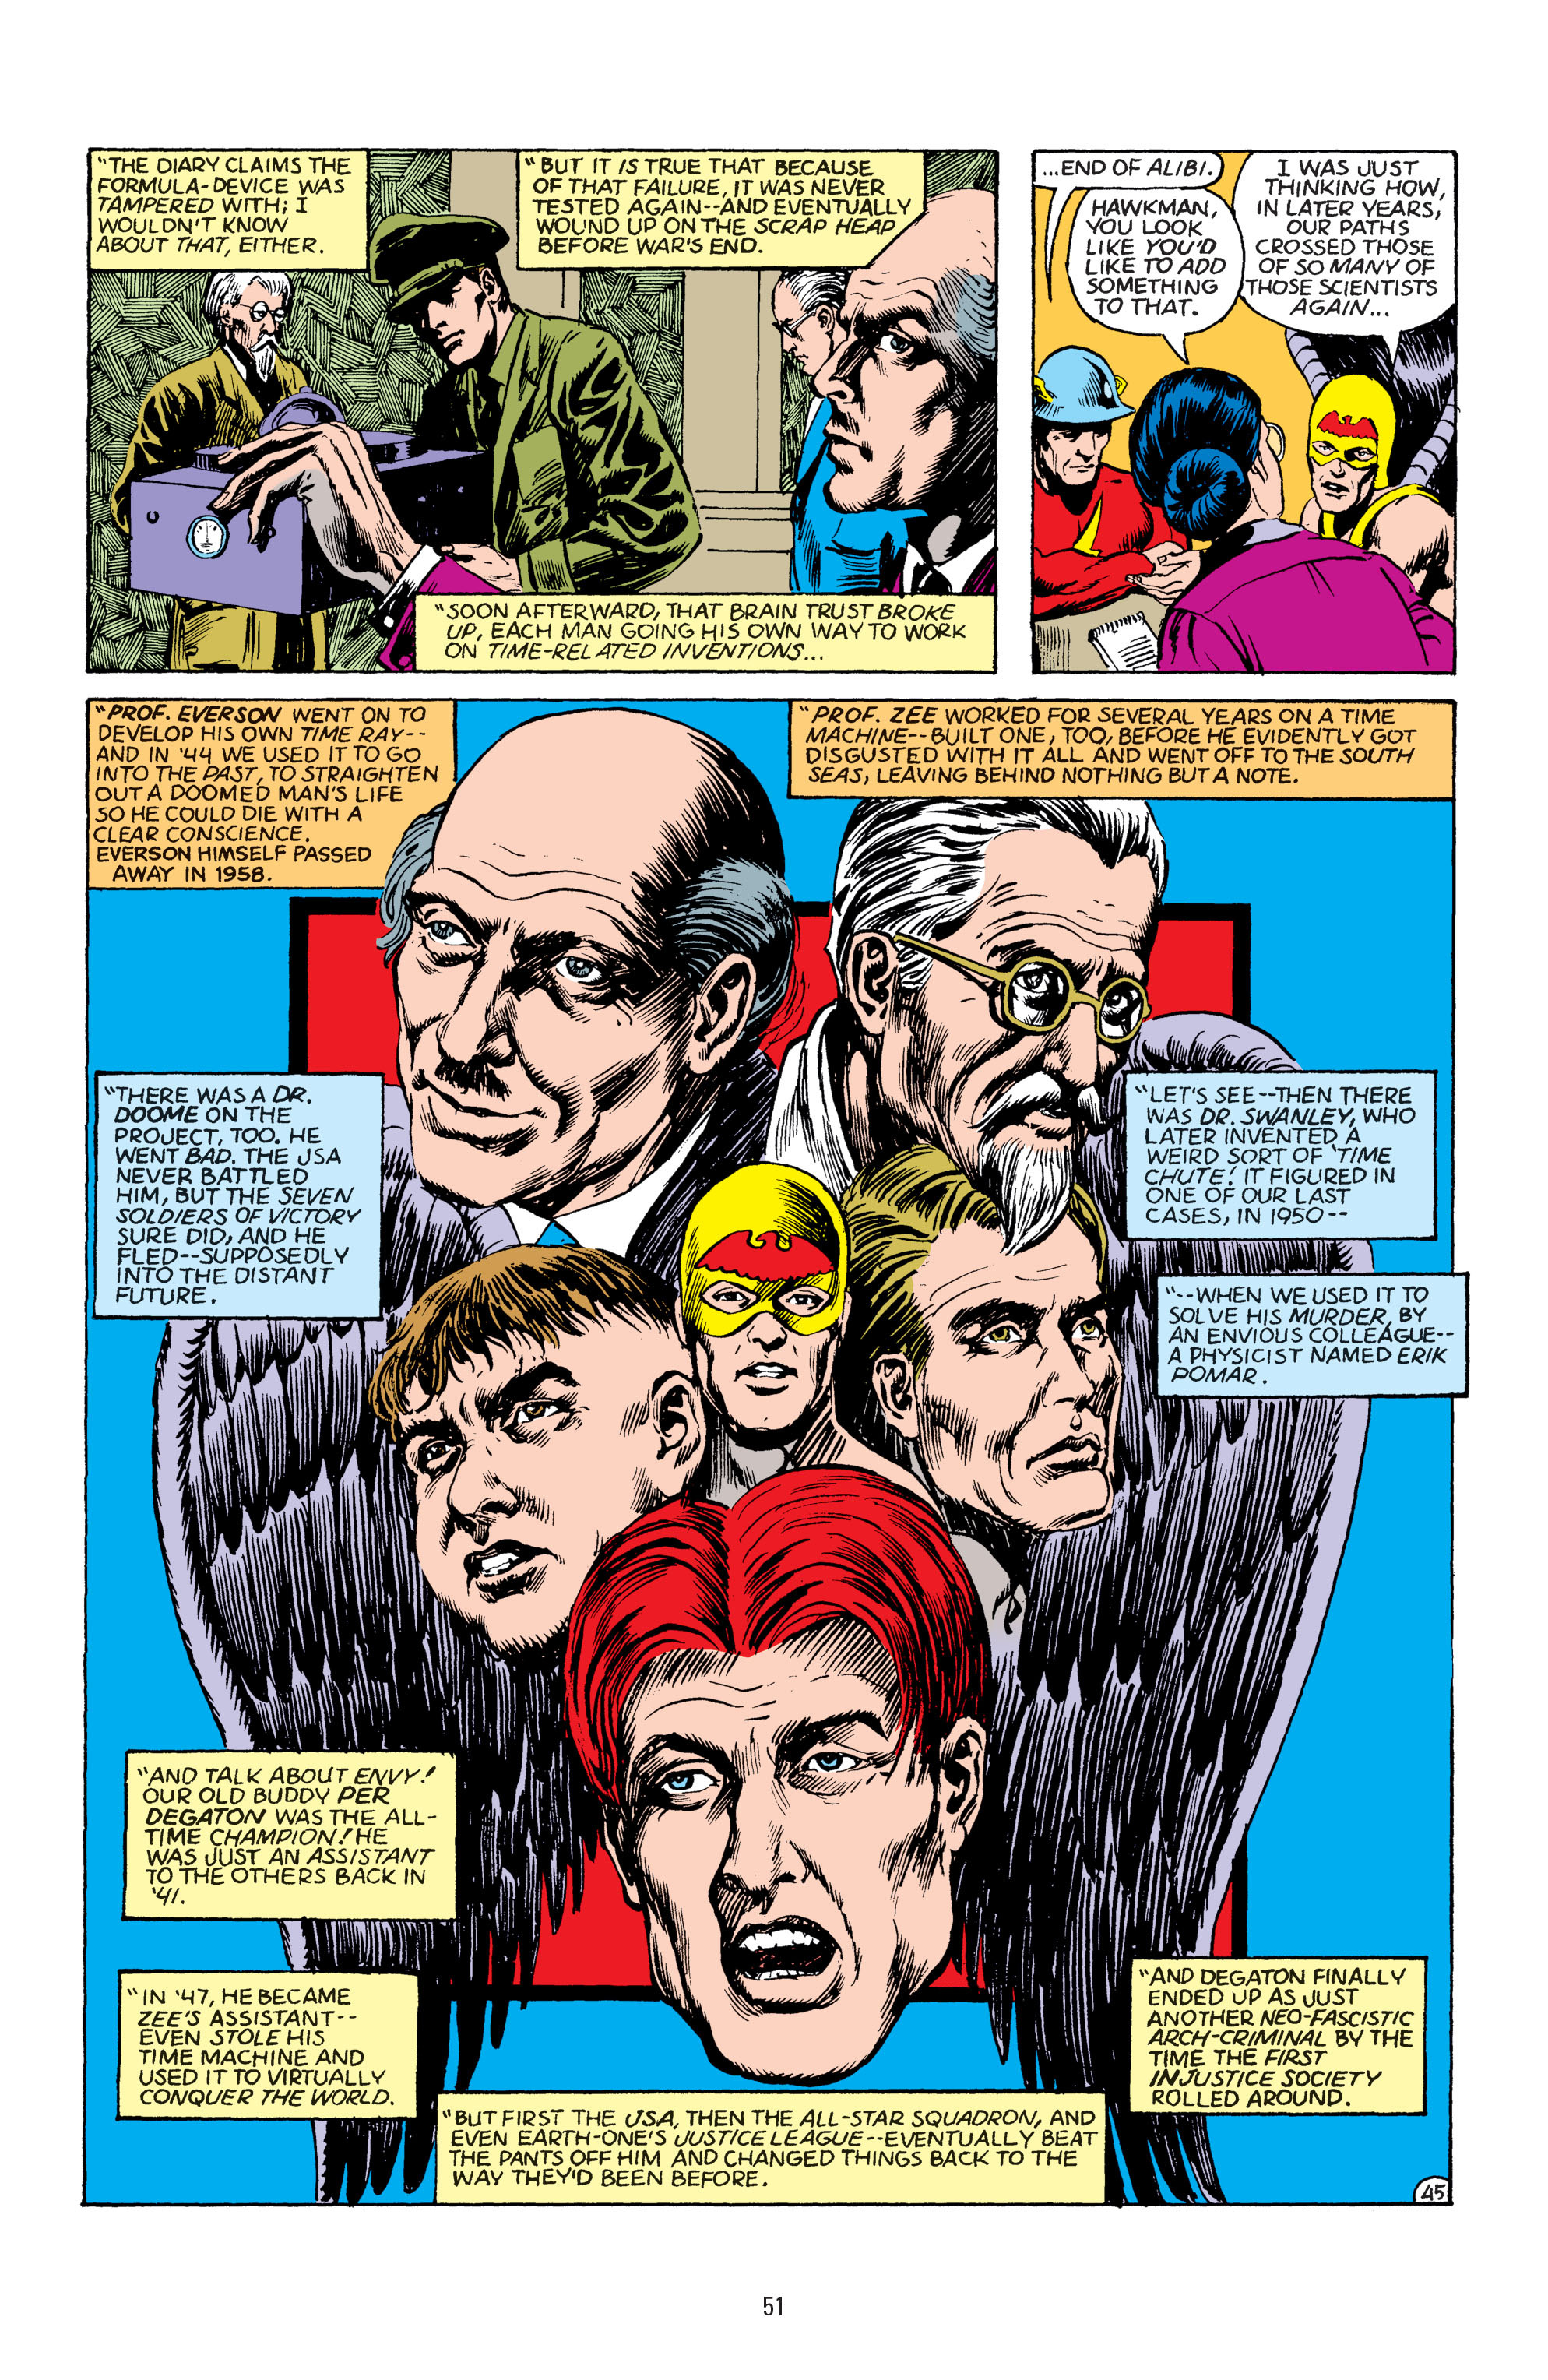 Read online America vs. the Justice Society comic -  Issue # TPB - 49